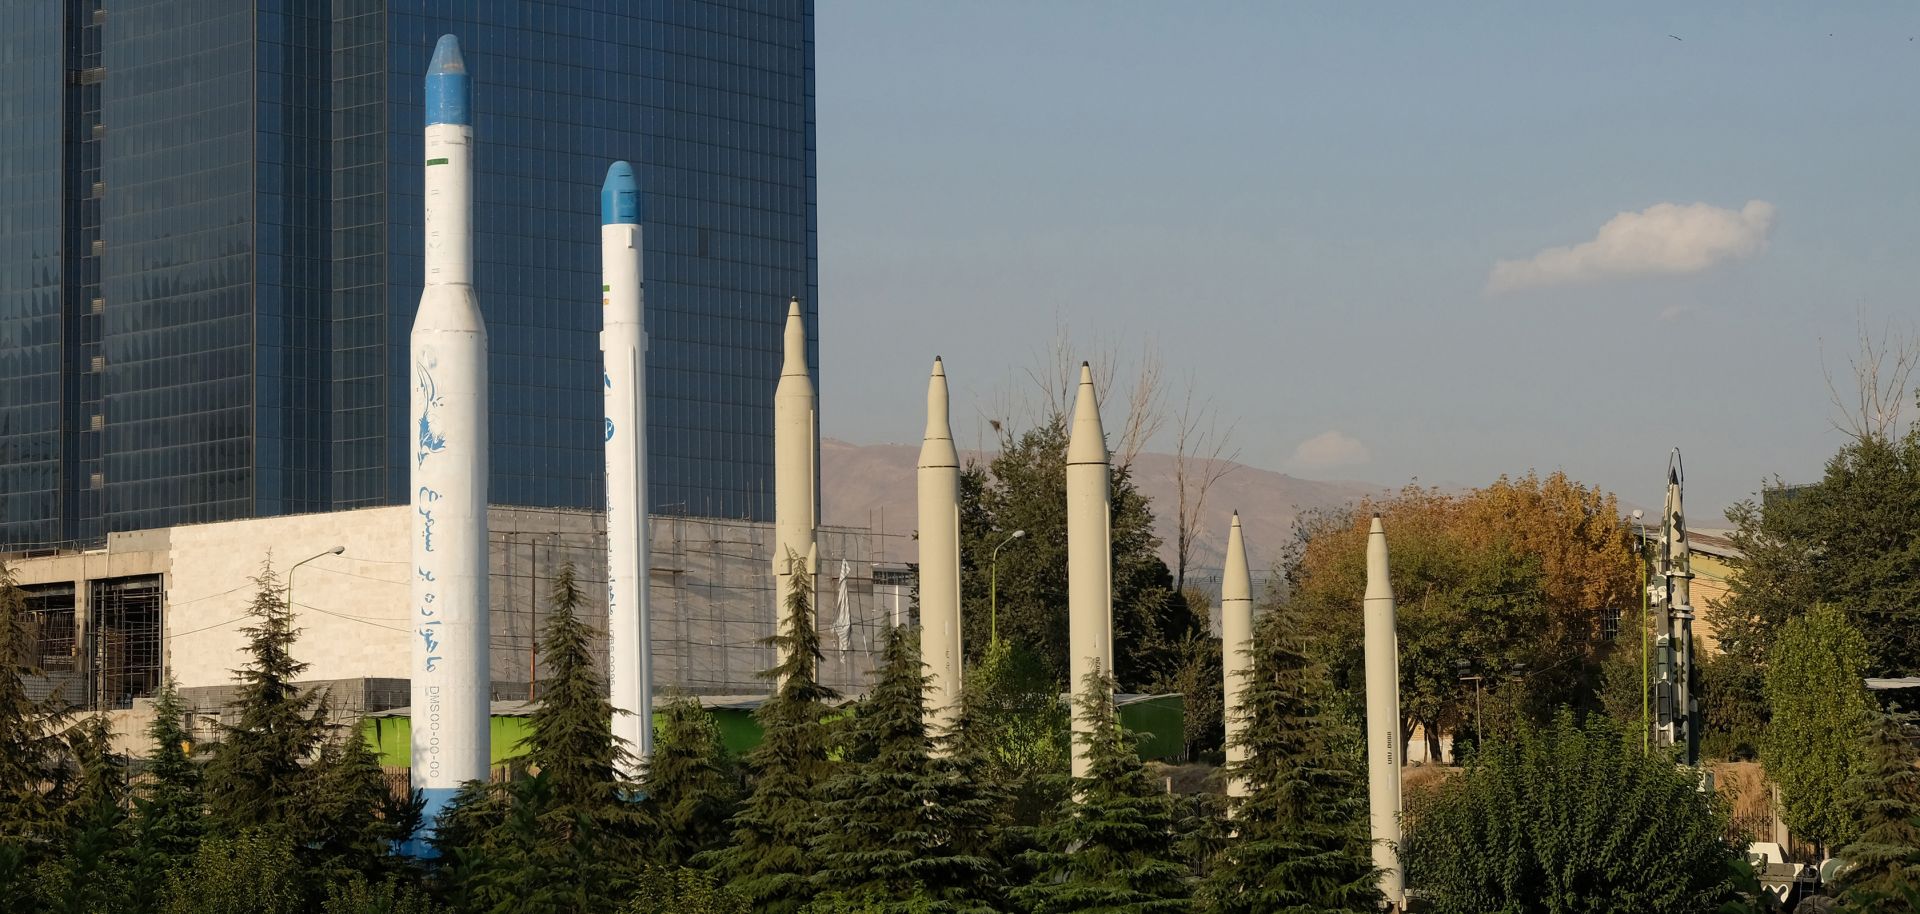 Iranian-made satellite carriers (left) and missiles (right) are displayed in front of the Holy Defense Museum in Tehran, Iran, on Sept. 20, 2020.